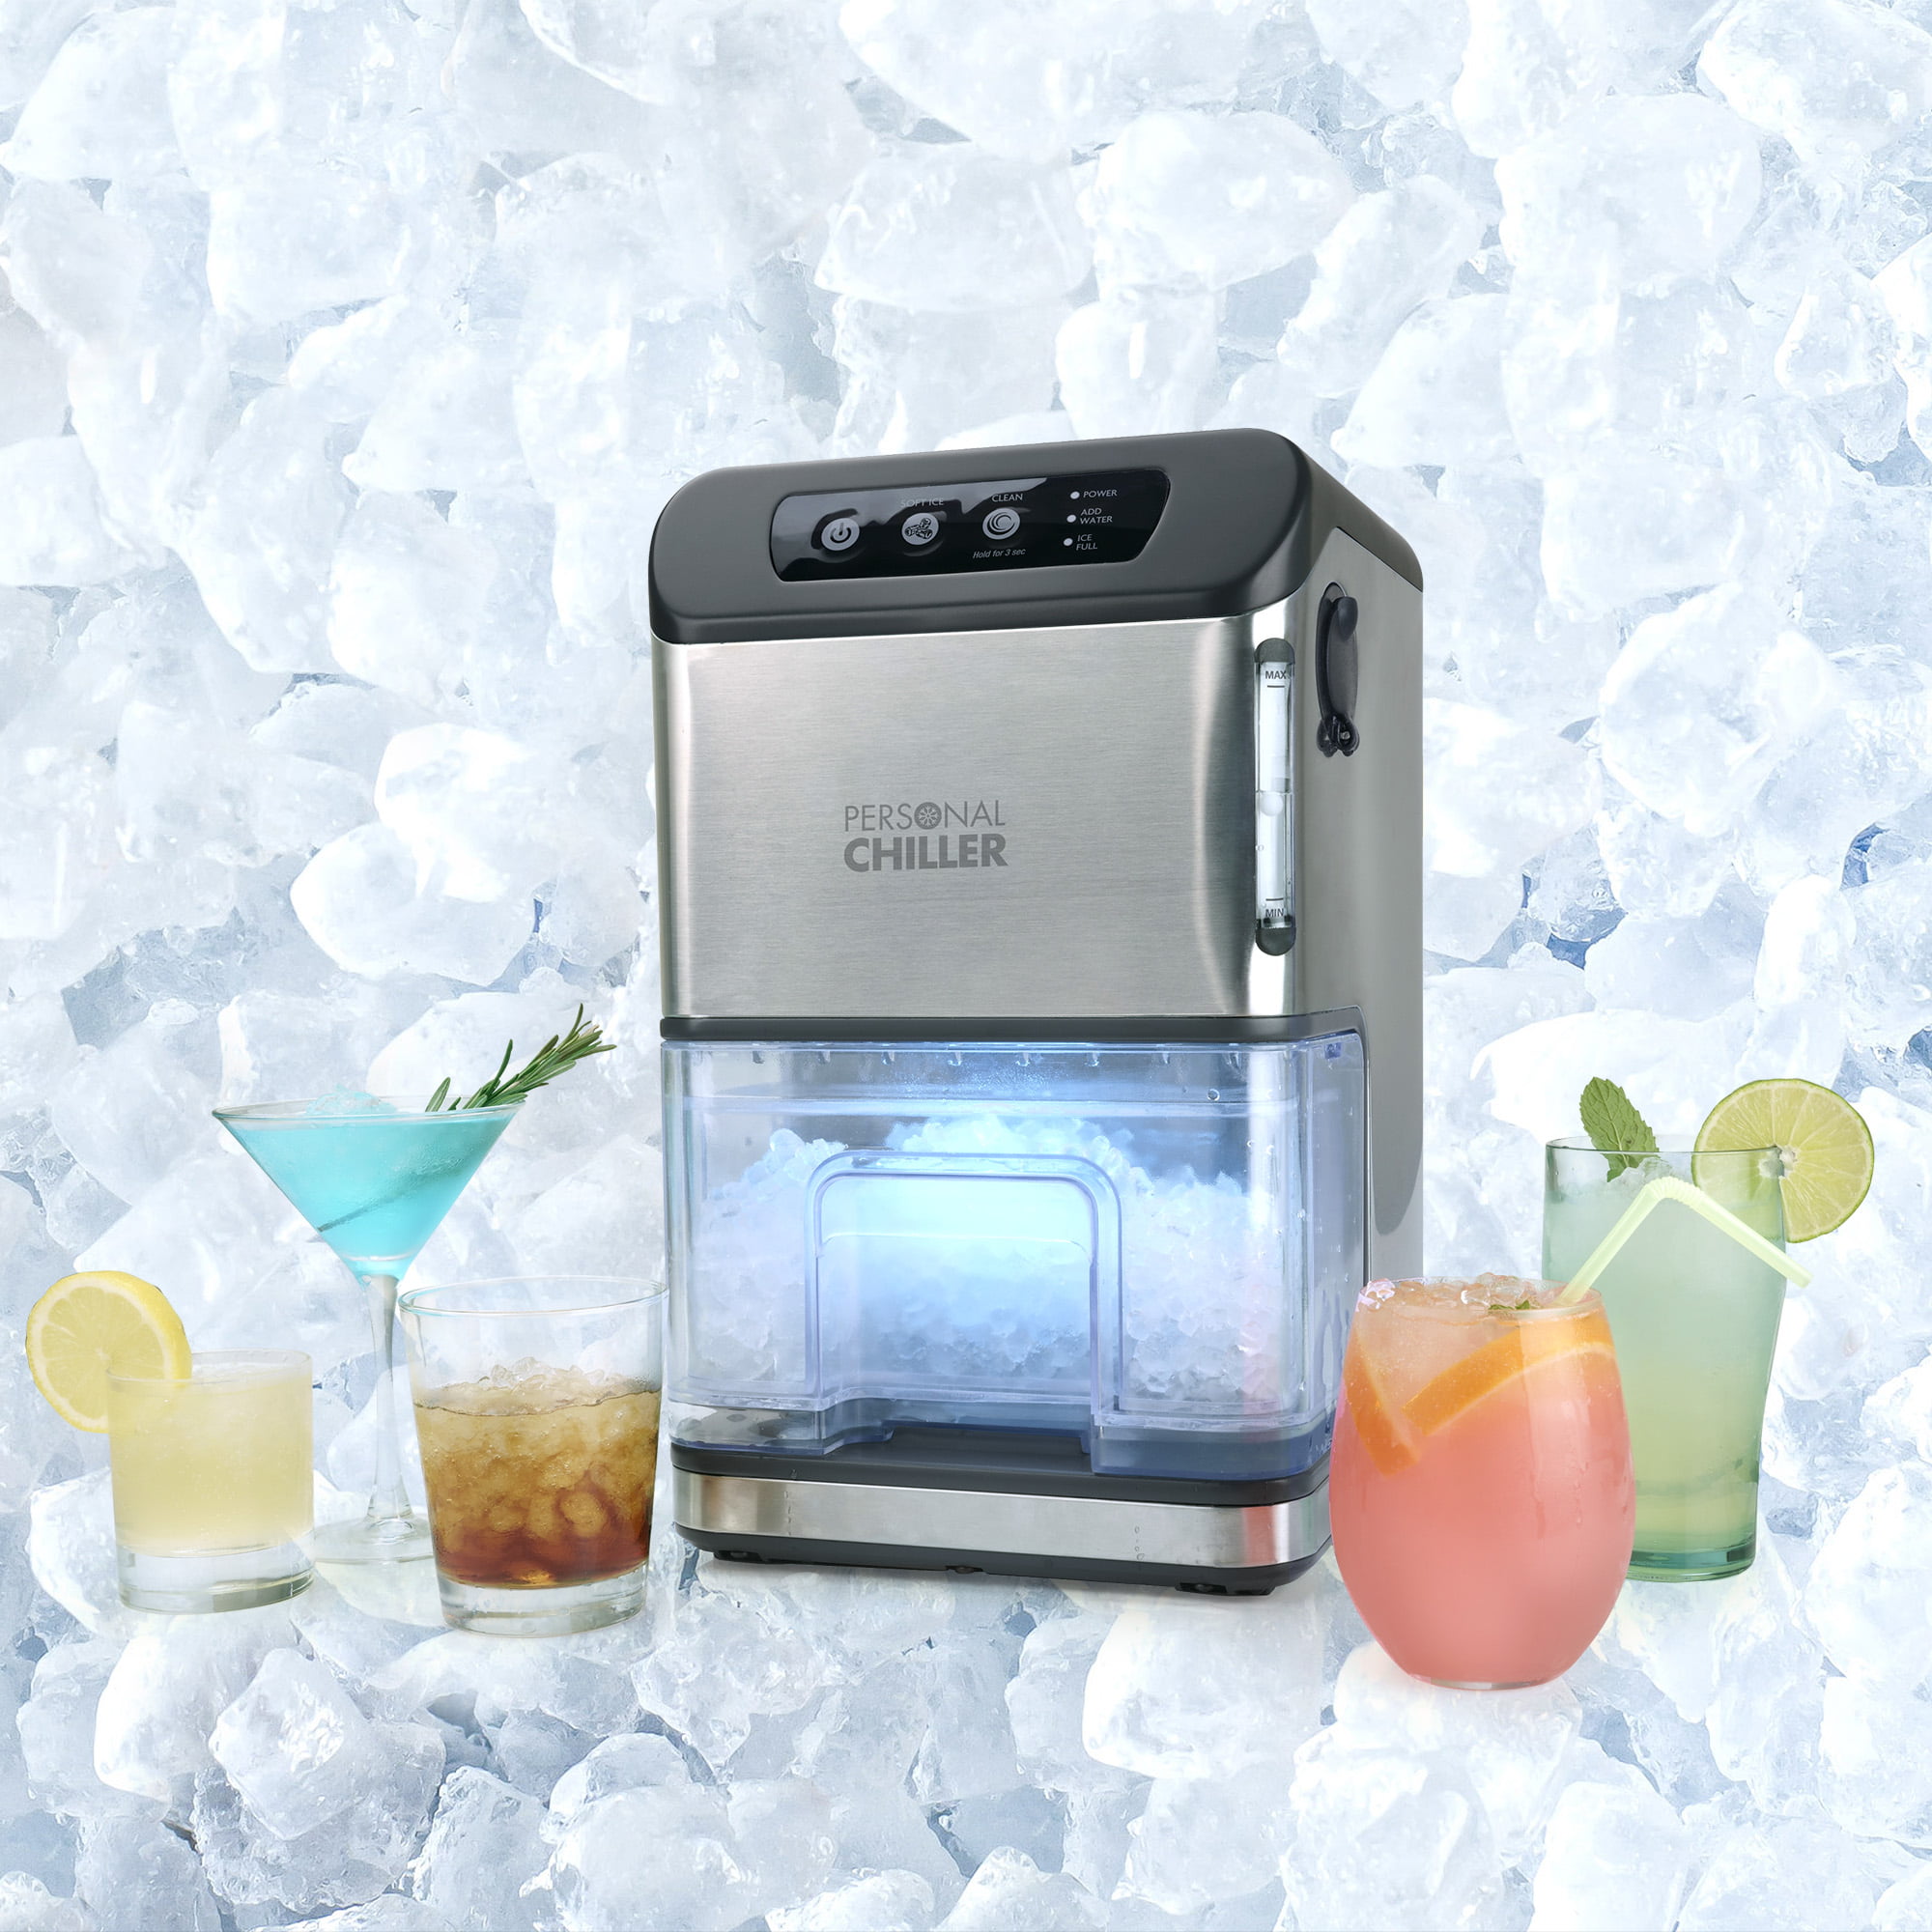 Personal Chiller Nugget Ice Maker $178! (Reg $400)